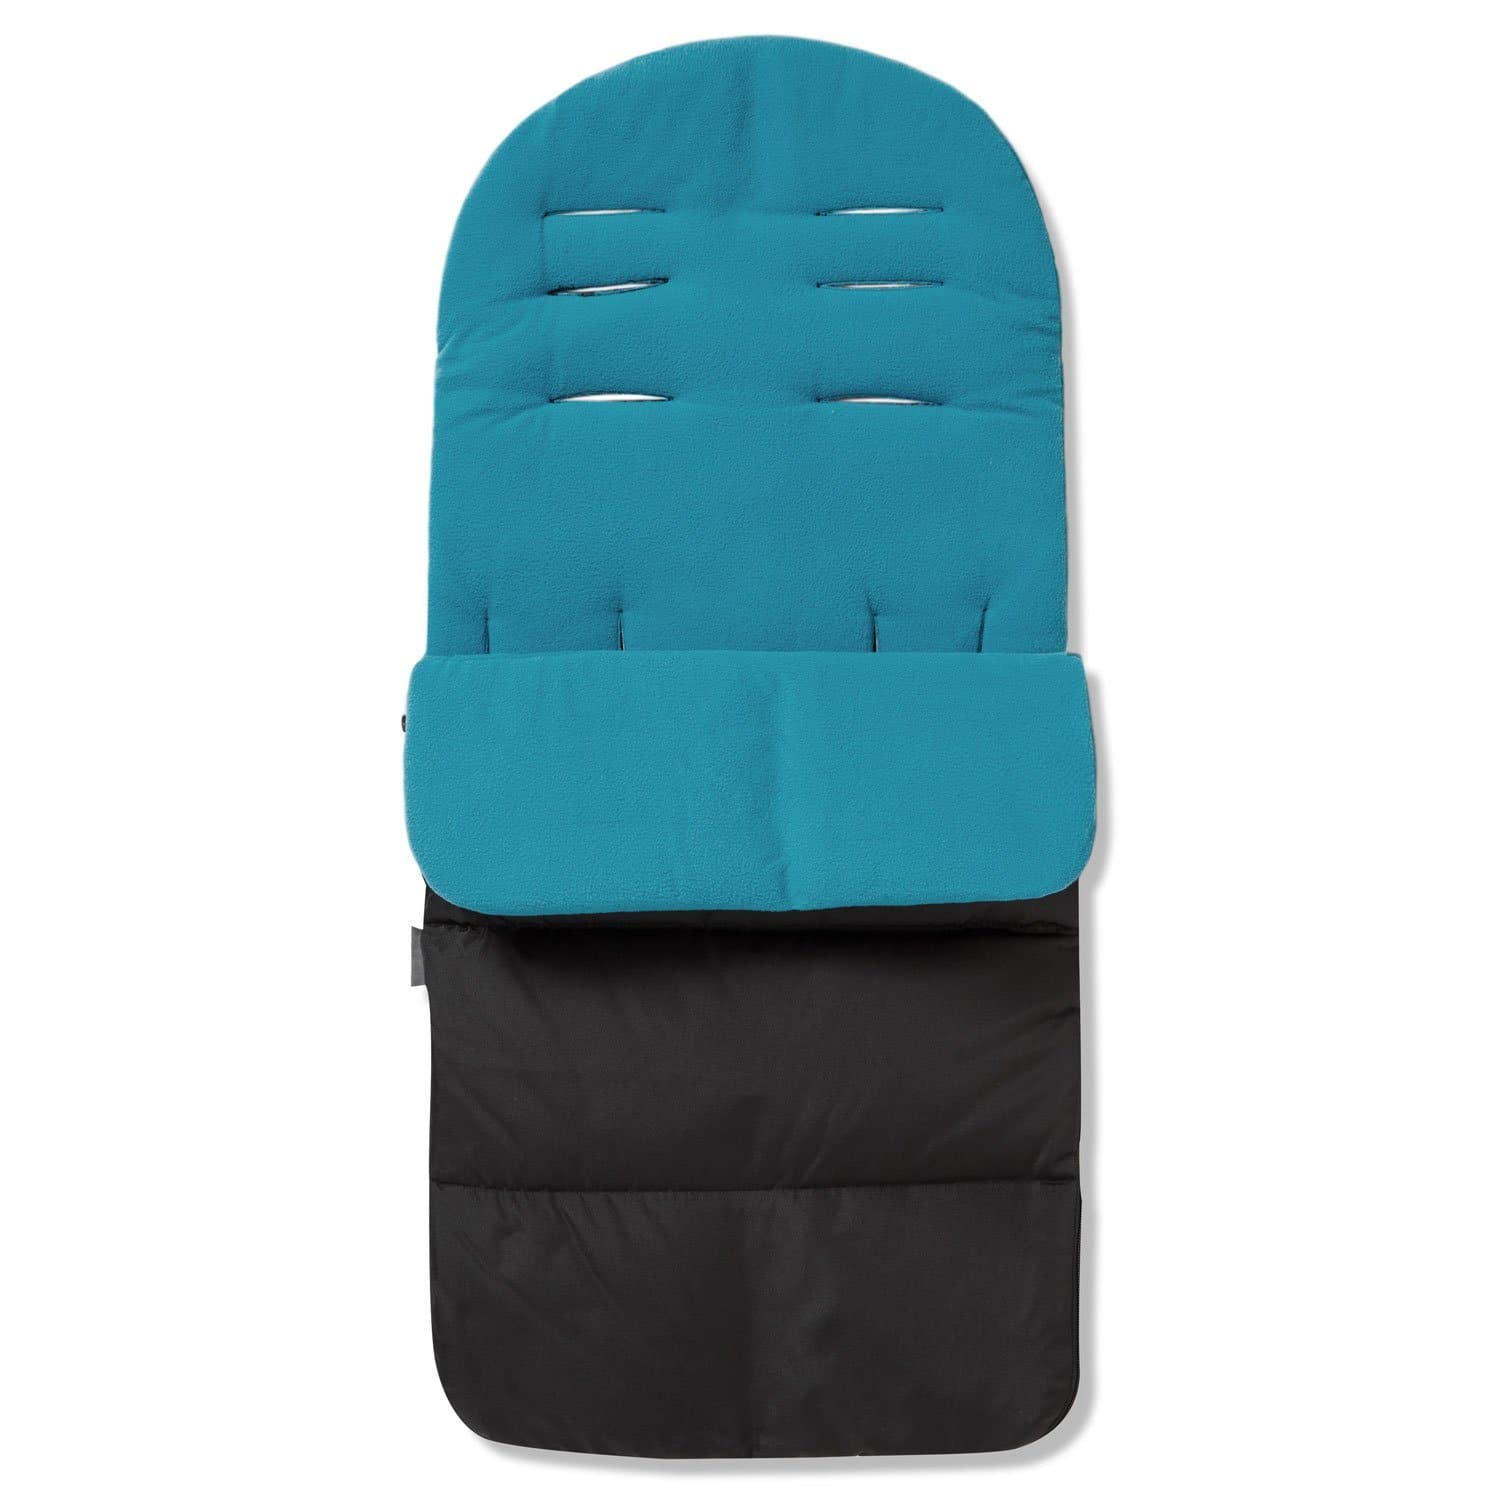 Premium Footmuff / Cosy Toes Compatible with Phil & Teds - Ocean Blue / Fits All Models | For Your Little One